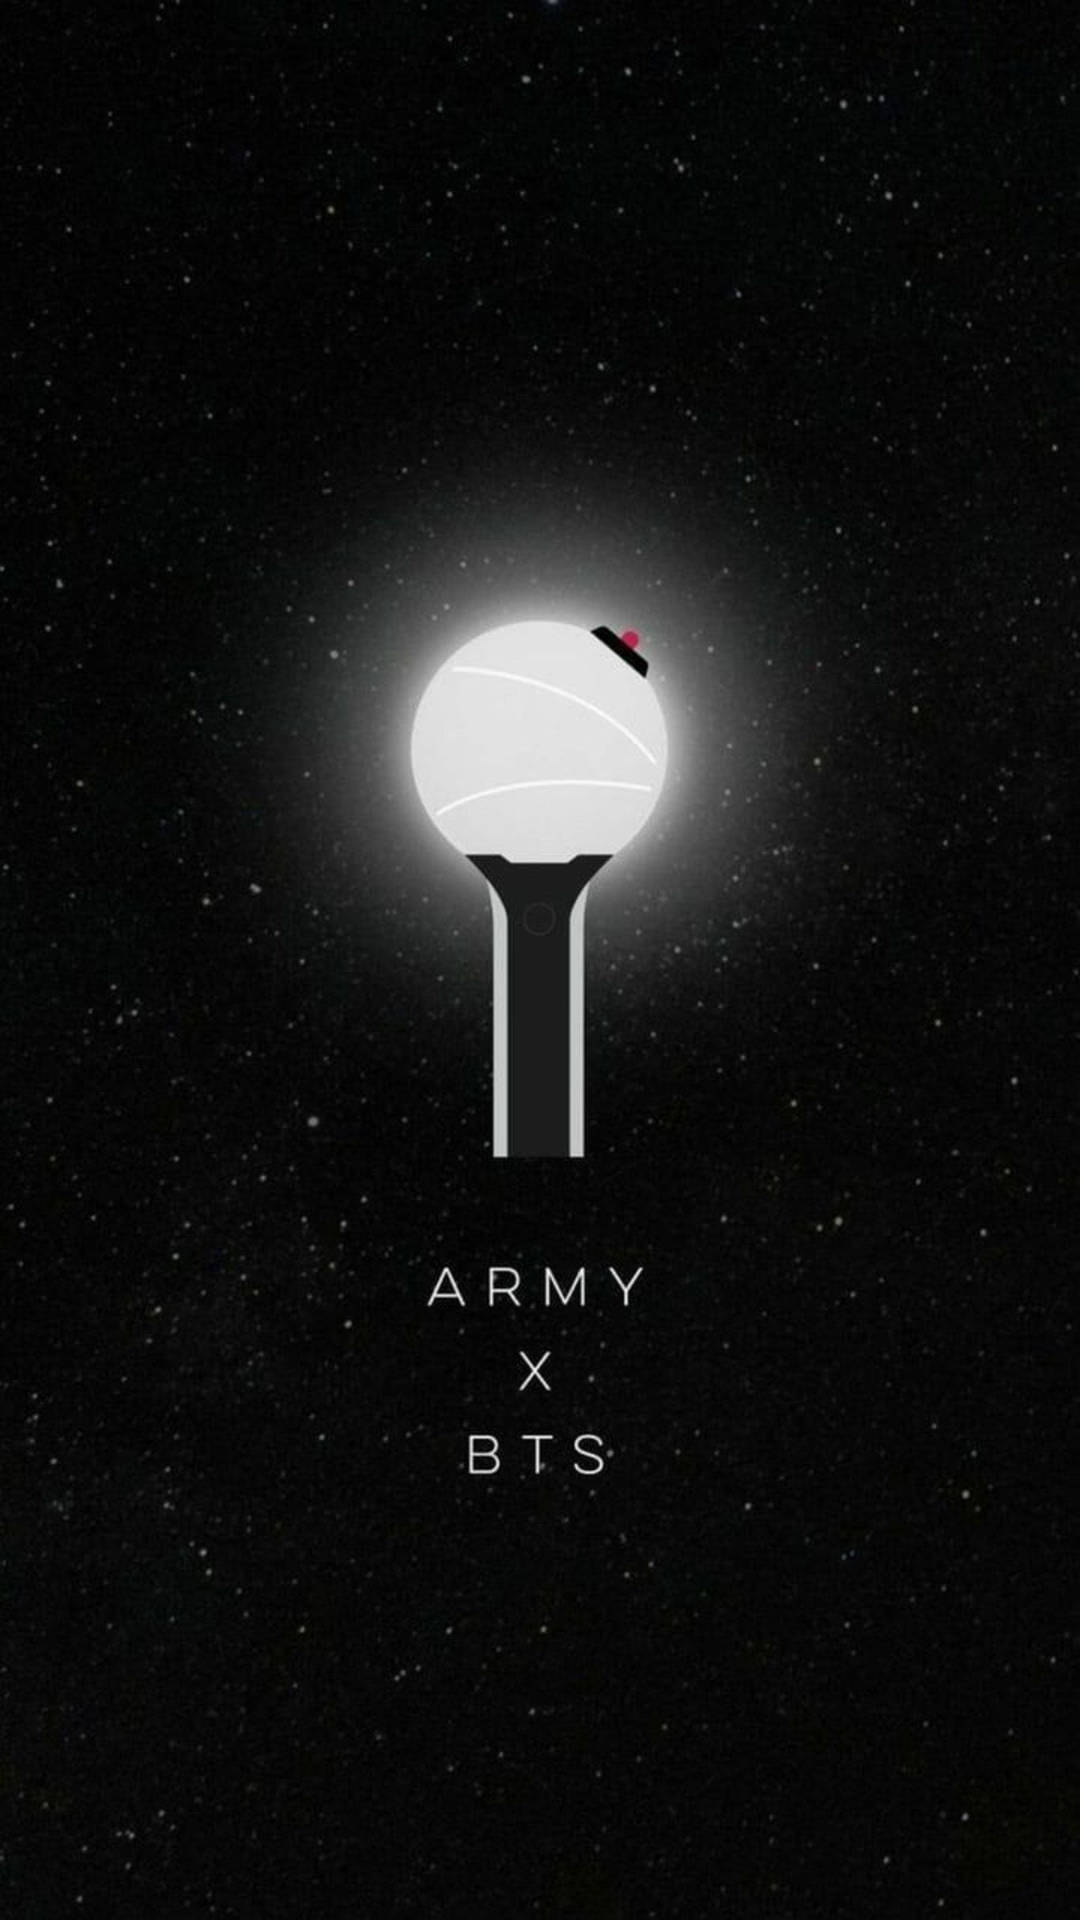 BTS Army X Bts Phone Wallpaper with high-resolution 1080x1920 pixel. You can use this wallpaper for your iPhone 5, 6, 7, 8, X, XS, XR backgrounds, Mobile Screensaver, or iPad Lock Screen - Android, BTS